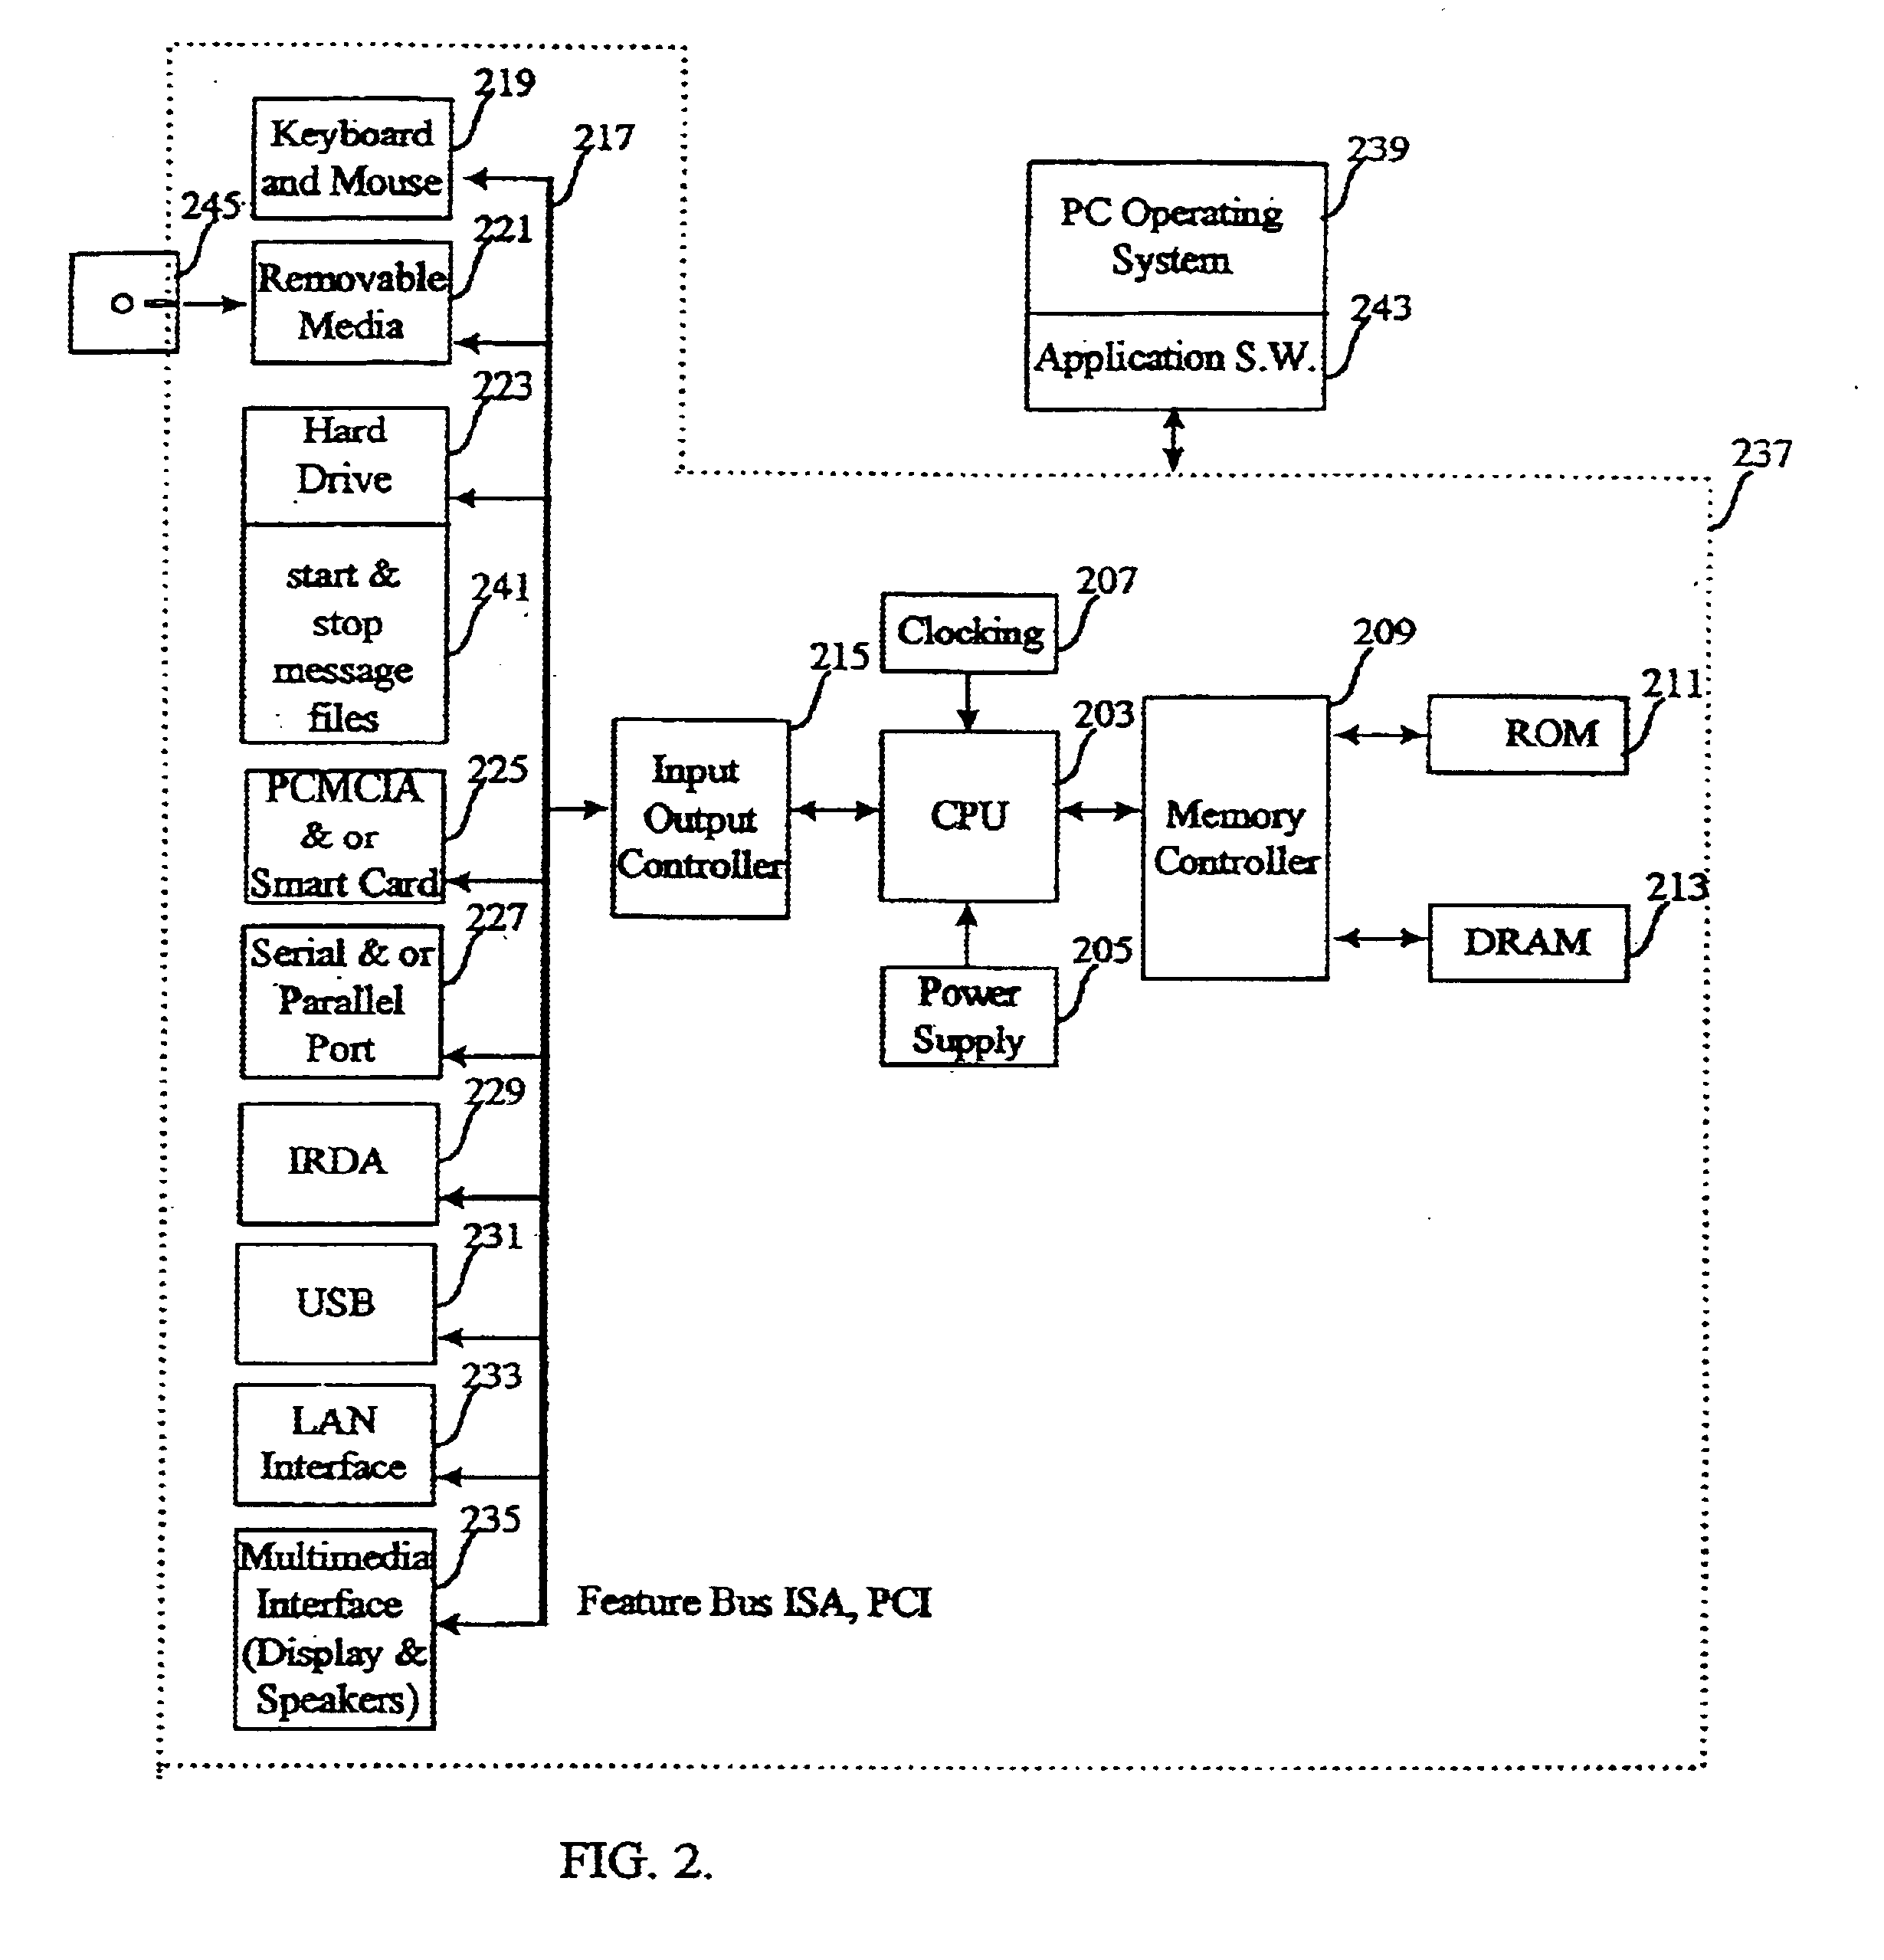 Method and system for filtering messages based on a user profile and an informational processing system event